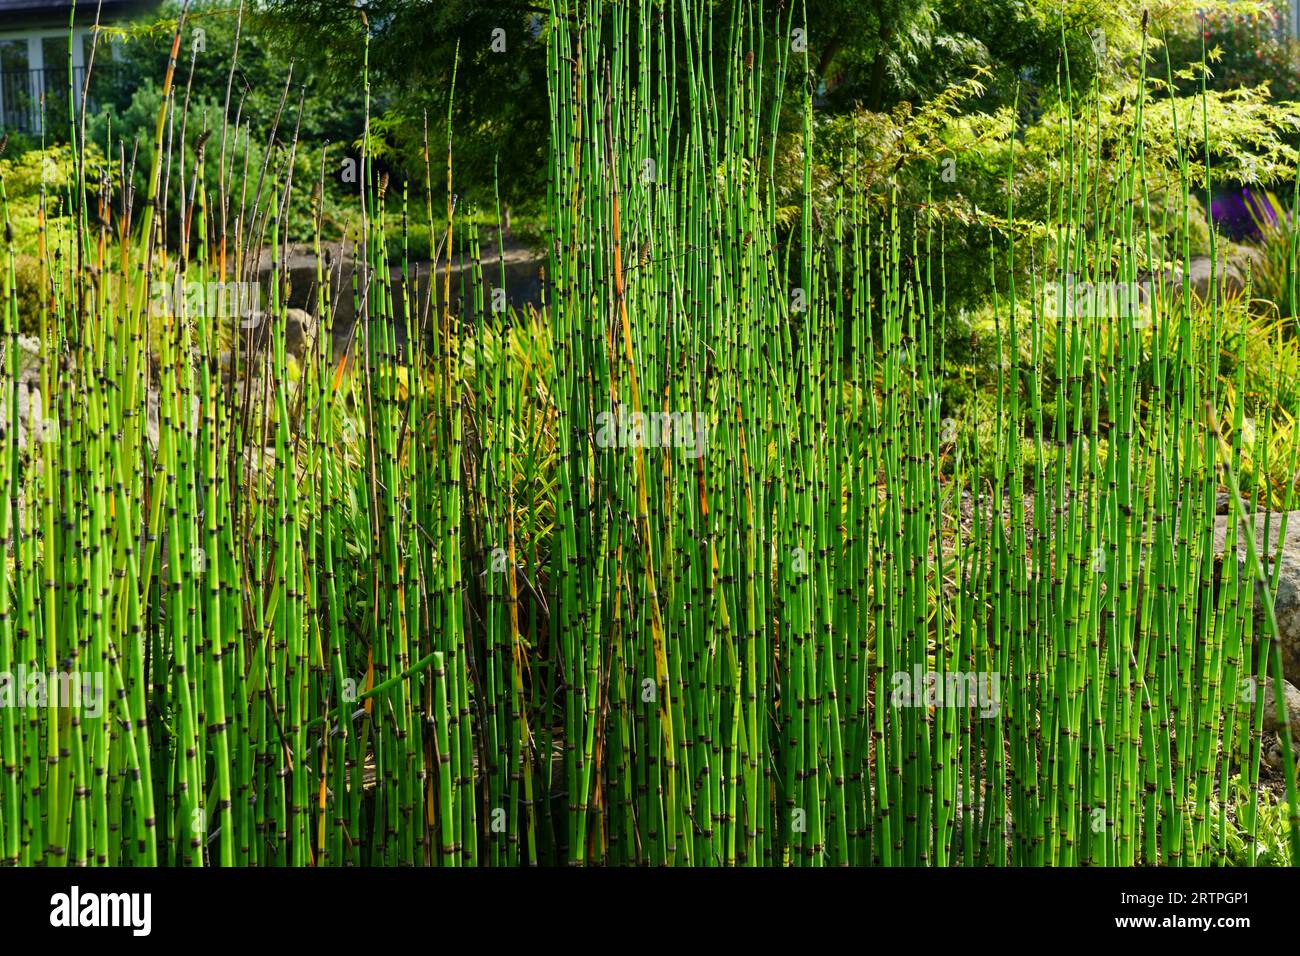 Equisetum hyemale, with vertically jointed dark green reed-like stalks and hollow stems, and up to 3 feet (0.91 m) in height. Stock Photo